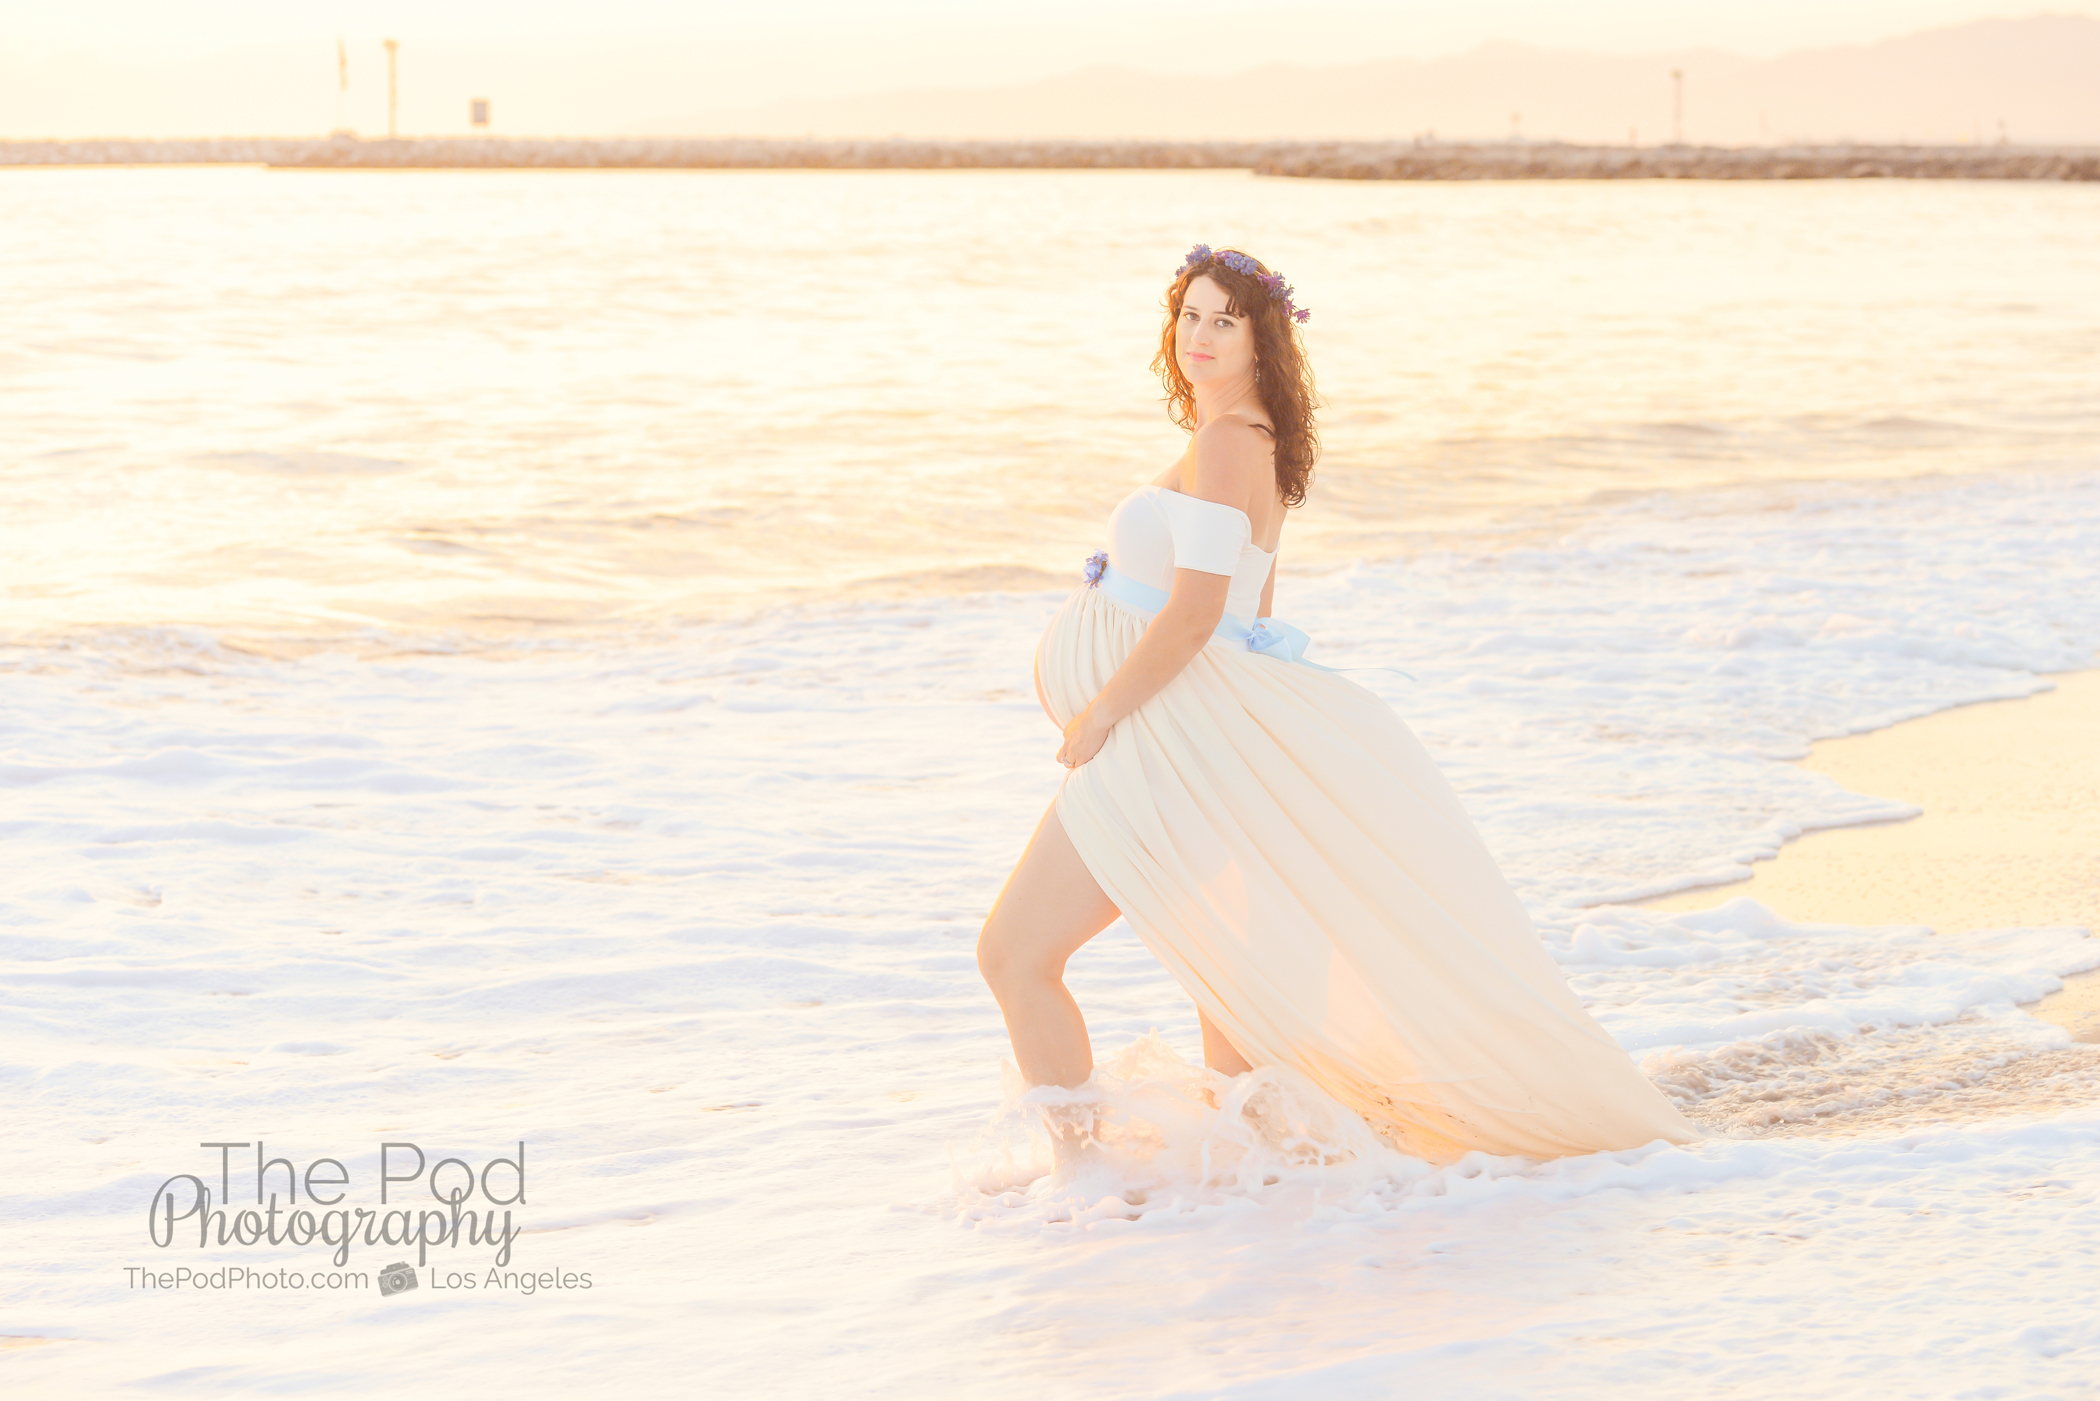 Maternity Photographer Playa Vista  Beach Mother and Son Pregnancy Photo  Shoot - Los Angeles based photo studio, The Pod Photography, specializing  in maternity, newborn, baby, first birthday cake smash and family pictures.